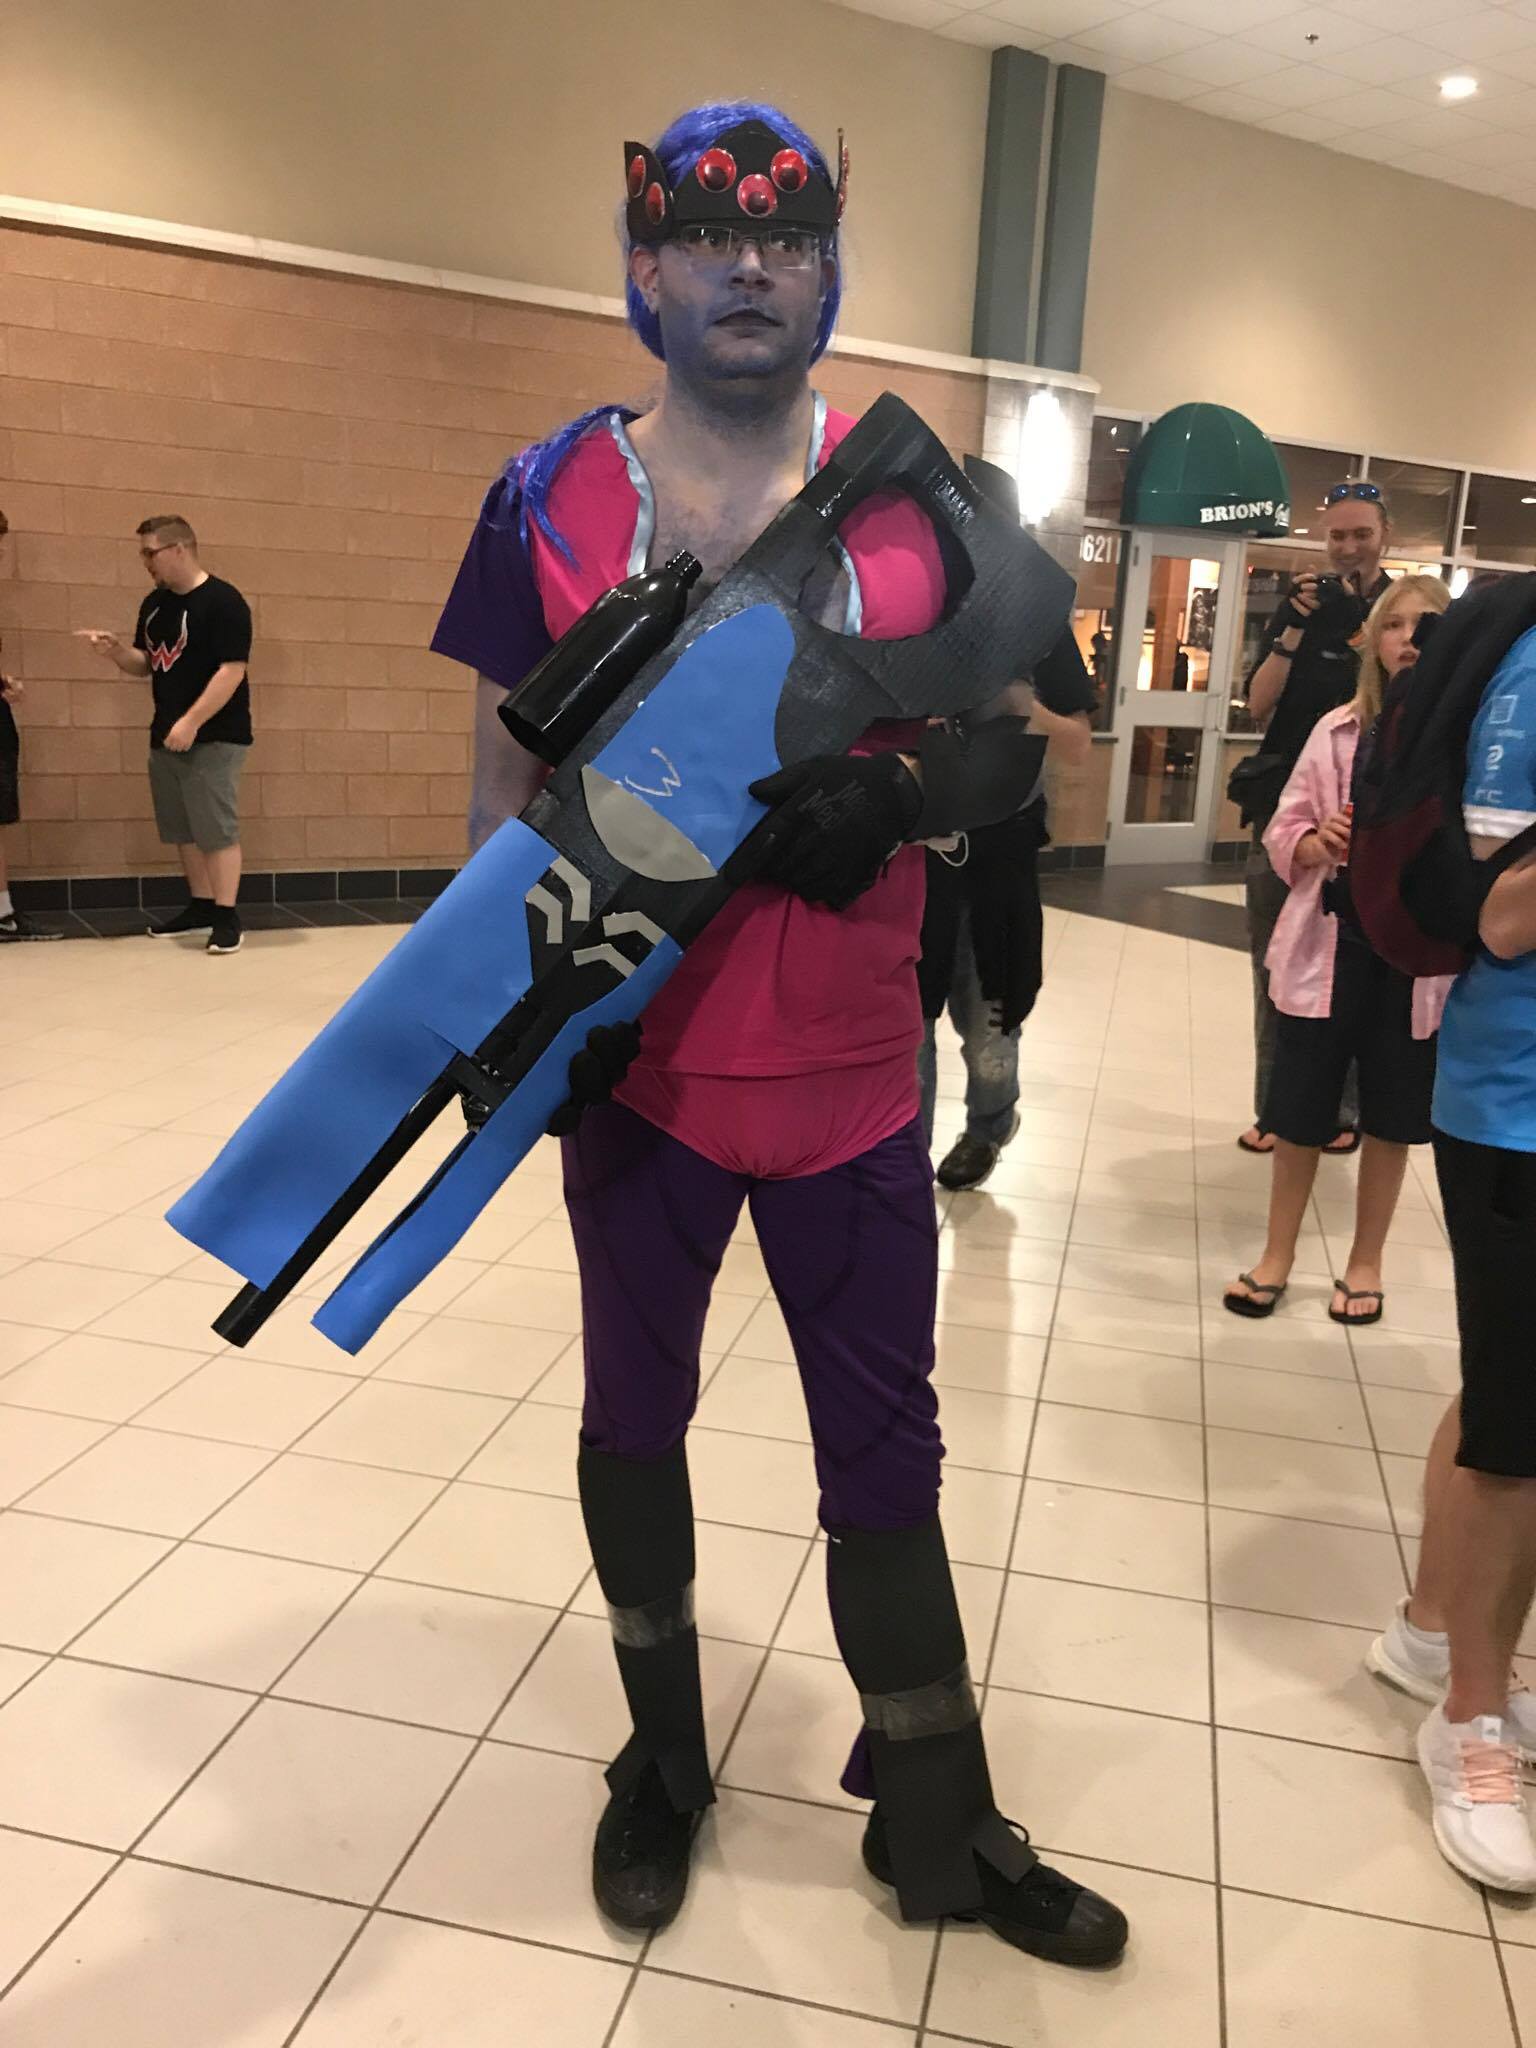 The Best Male Widowmaker Cosplay Ever.